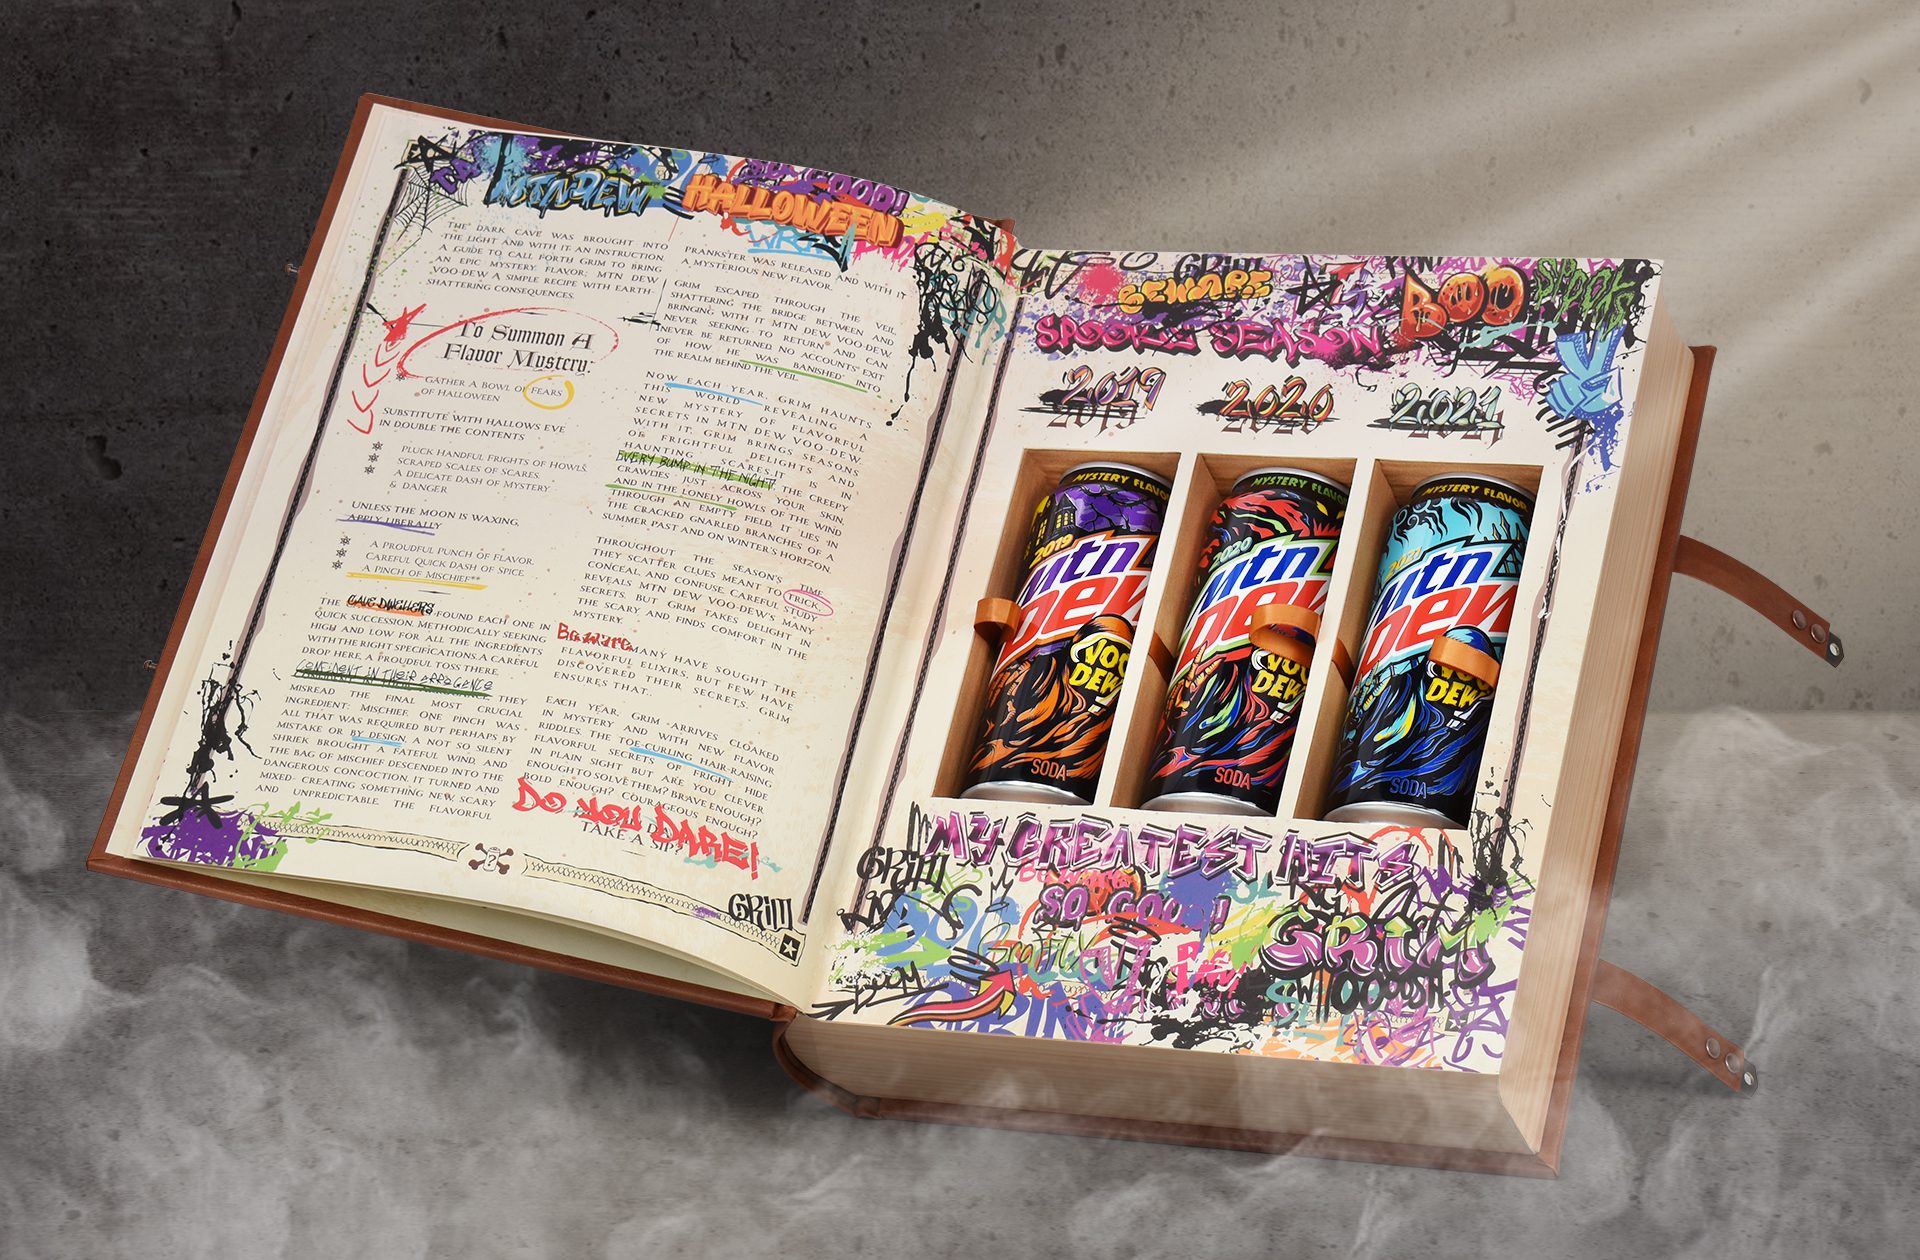 Photograph of the inside of a halloween themed influencer unboxing experience for Mountain Dew Voodew, featuring three cans of limited edition mtn dew flavors.